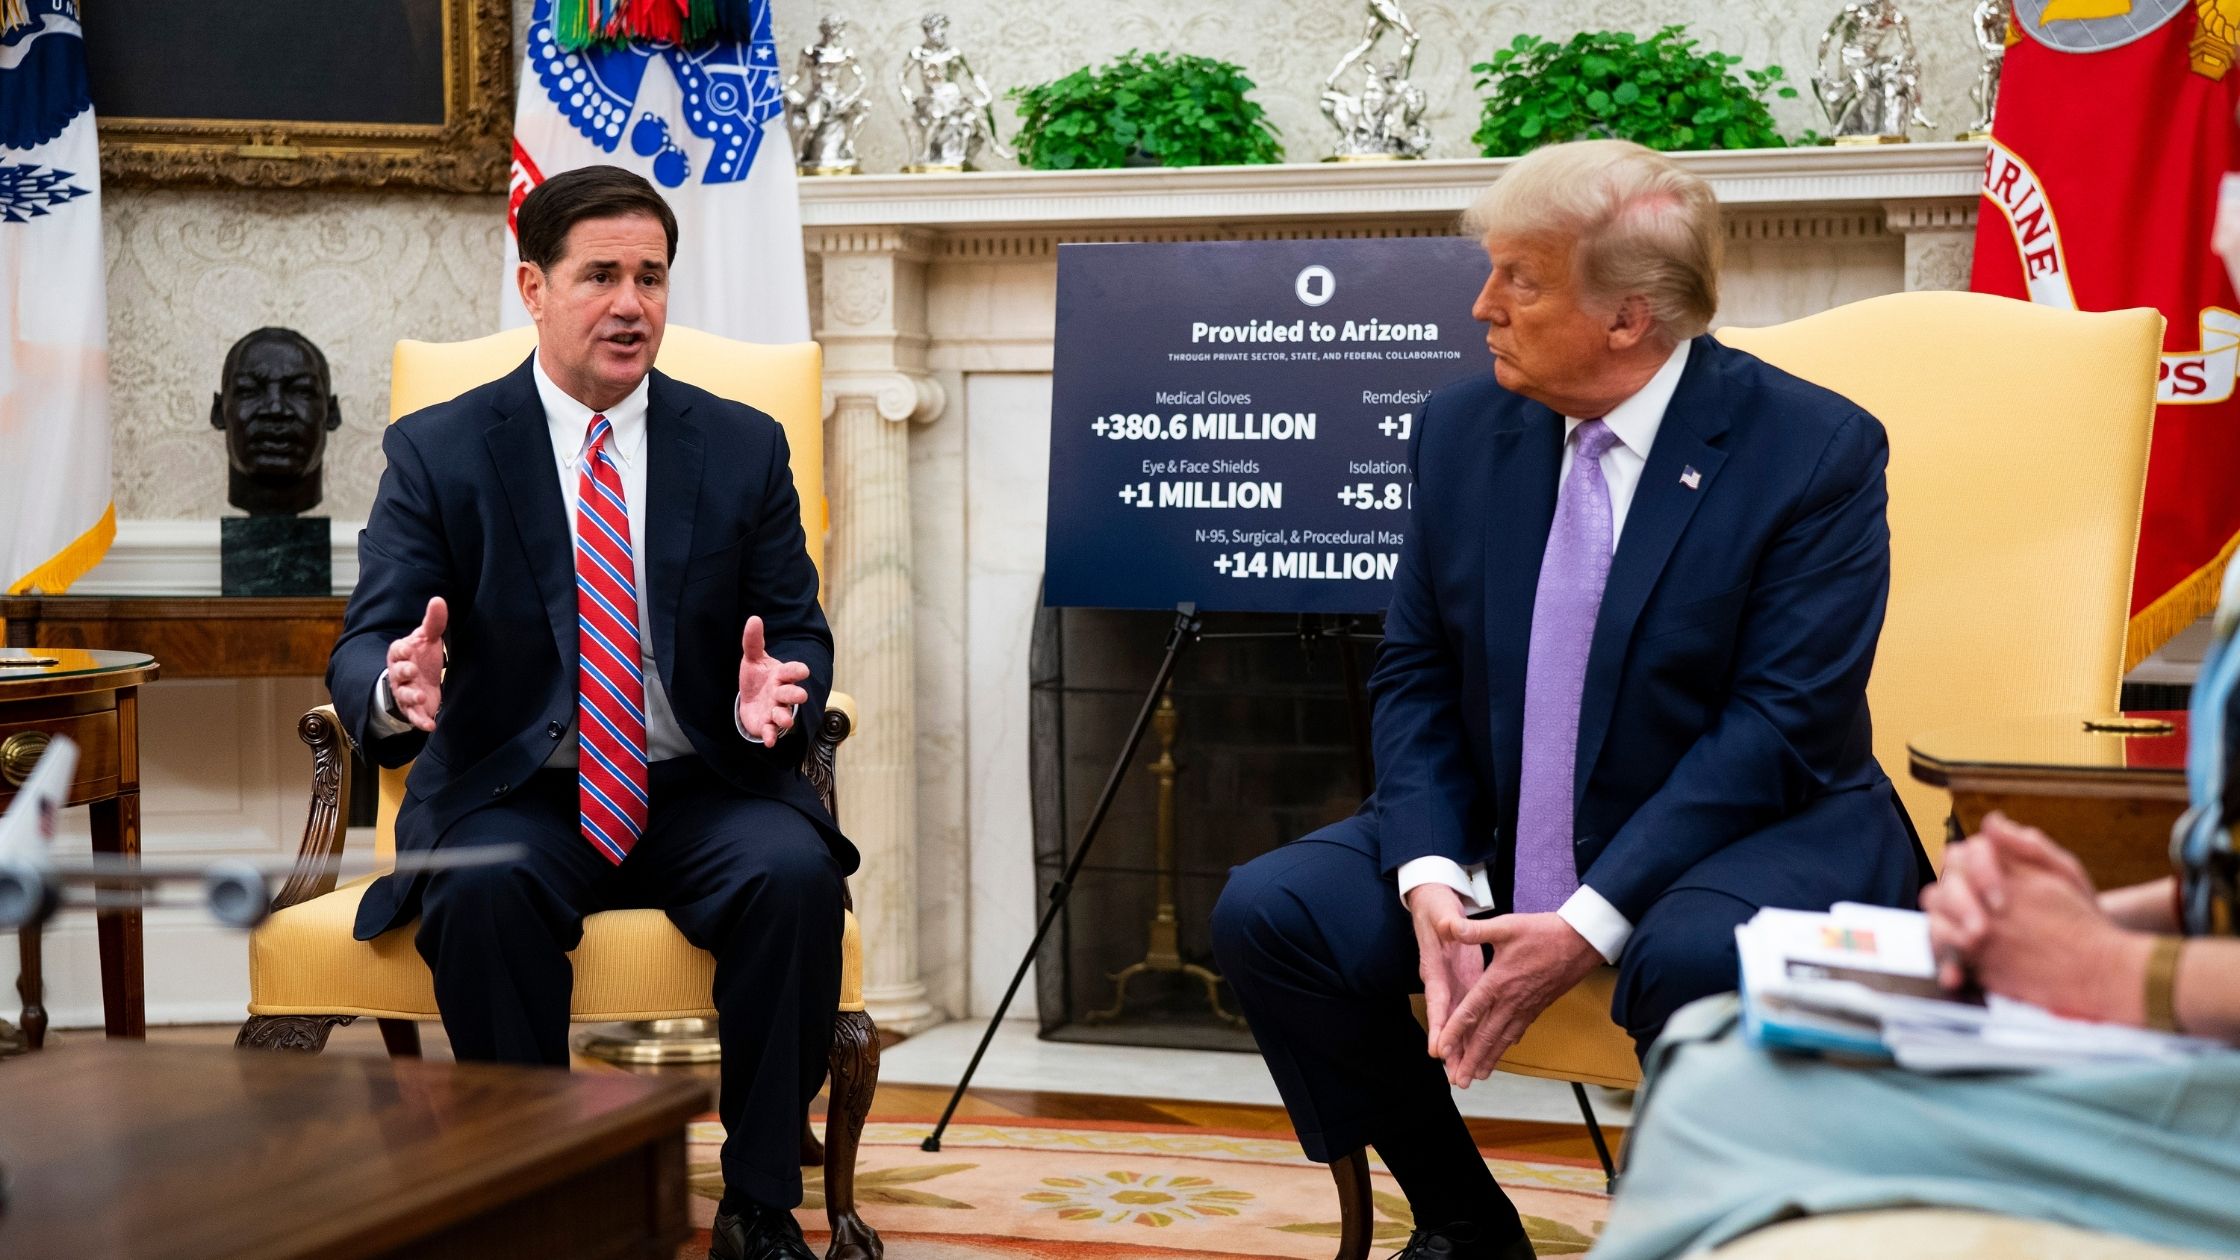 President Donald Trump meets with Arizona Governor Doug Ducey (L) in the Oval Office of the White House on August 5, 2020 in Washington, D.C.